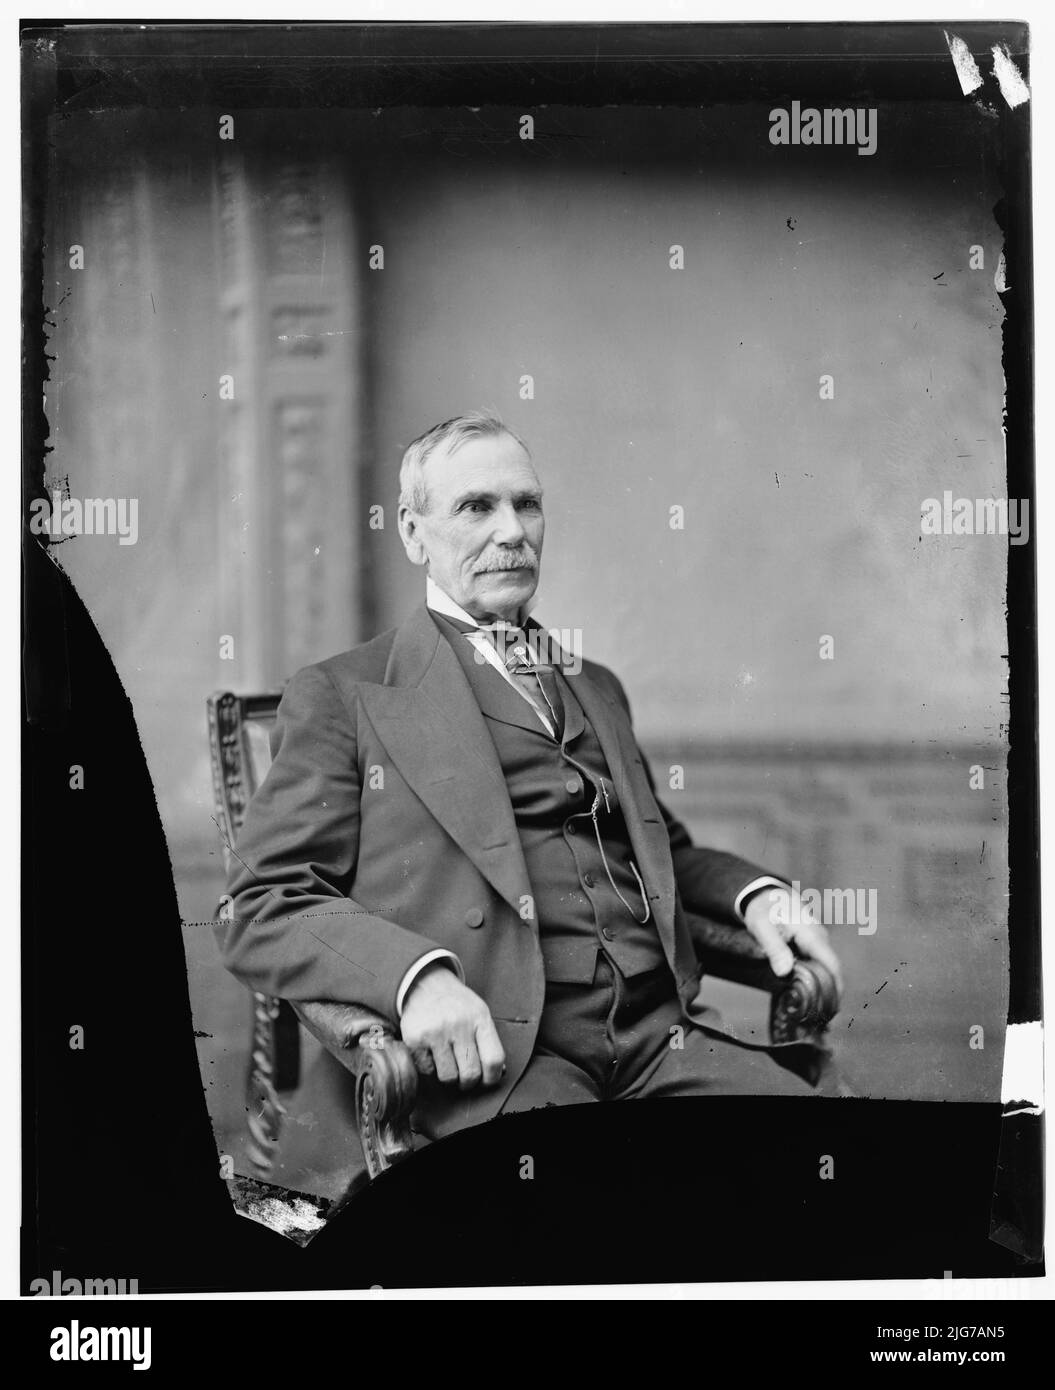 General James Shields of Illiinois and Missouri, 1865-1880. Shields, General James (not in uniform) Senator from Ill. &amp; Missouri, between 1865 and 1880. [Politician and Union Army soldier: the only person in U.S. history to serve as a Senator for three different states - Illinois, Minnesota and Missouri; almost fought a duel with Abraham Lincoln; wounded in the Mexican-American War after his horse was shot out from underneath him]. Stock Photo